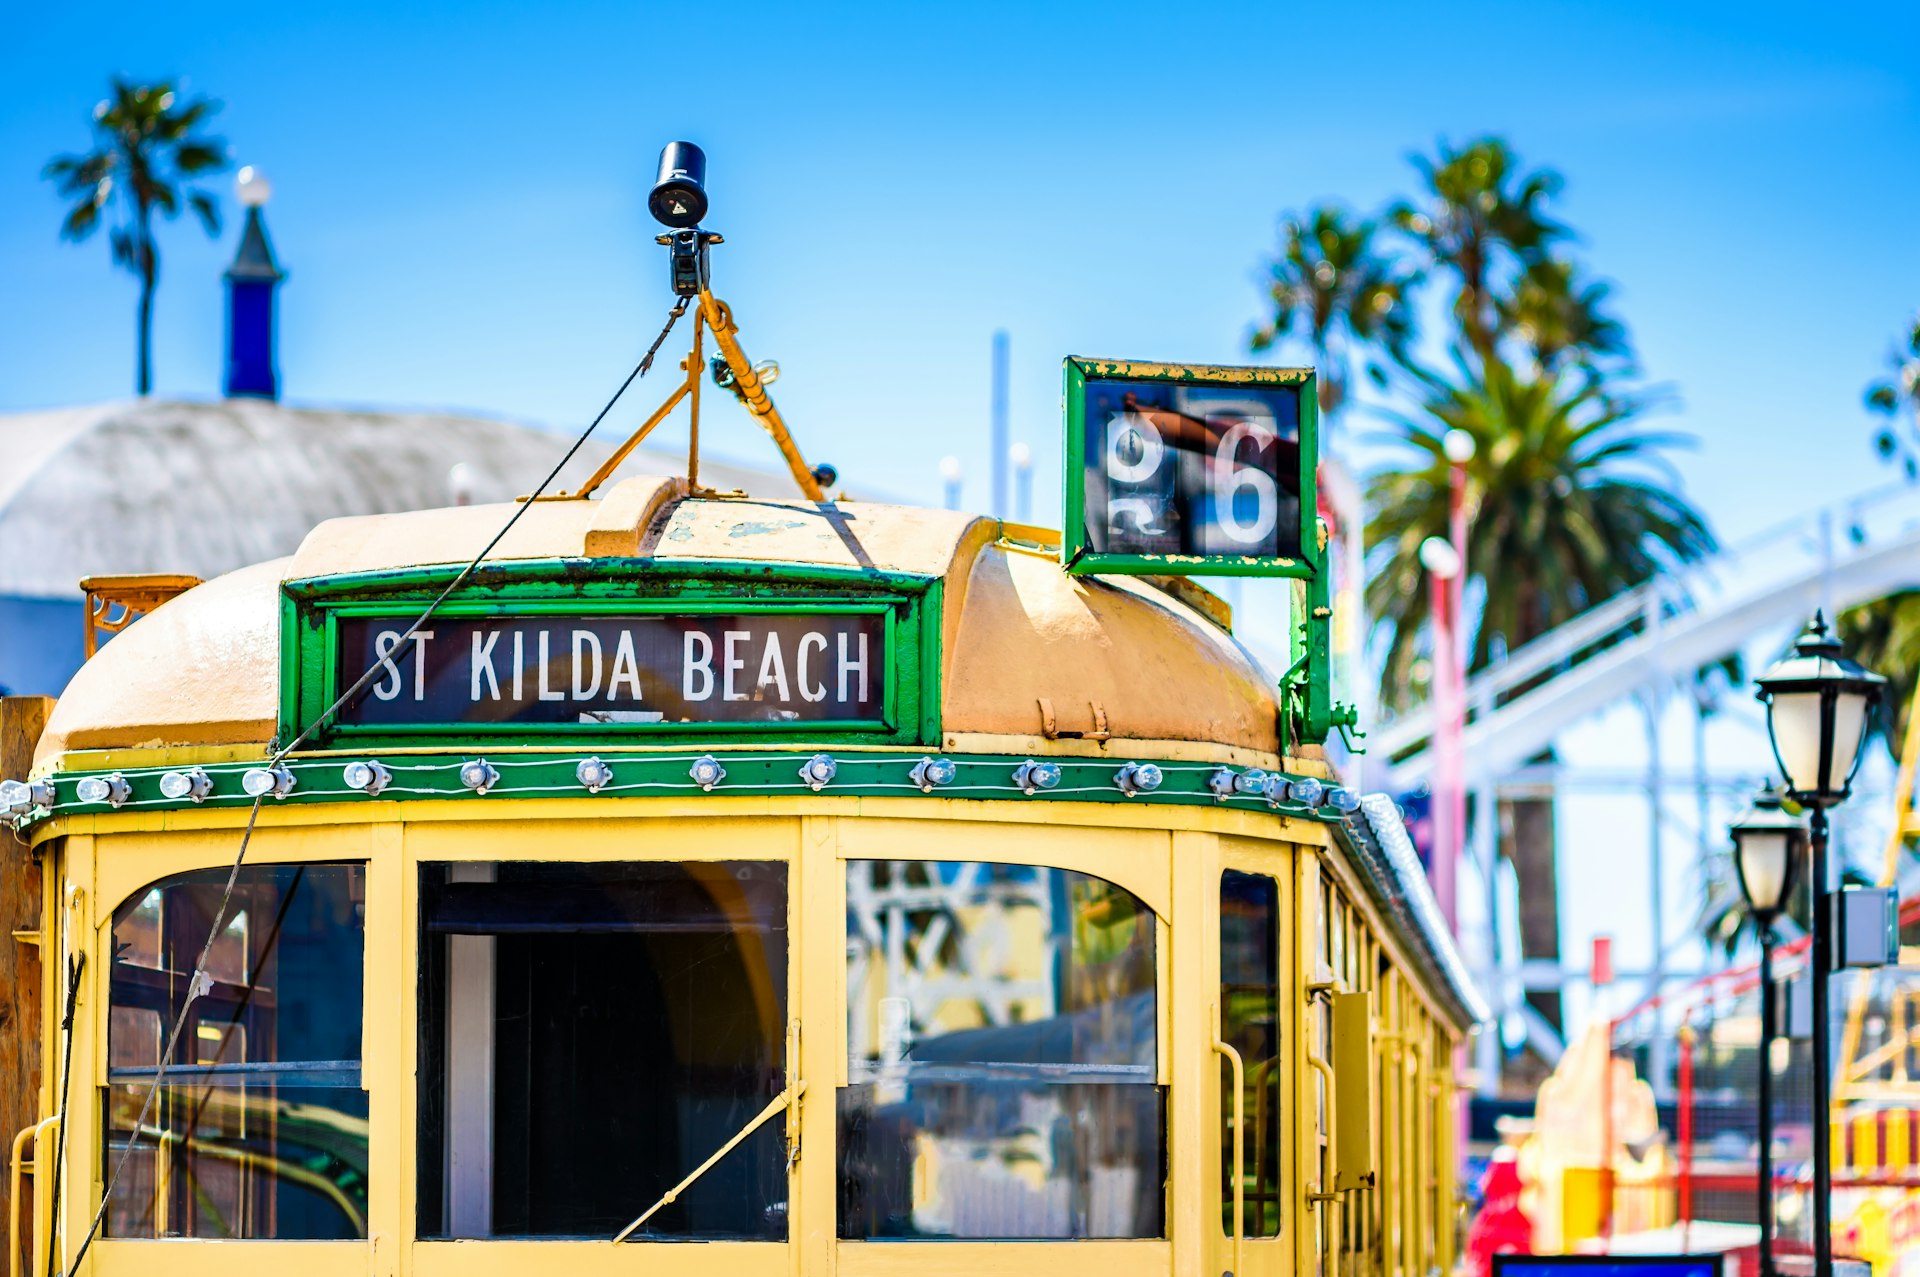 The top half of a yellow Melbourne tram, with a destination card that says 'St Kilda'. Behind the tram is a bright blue sky.